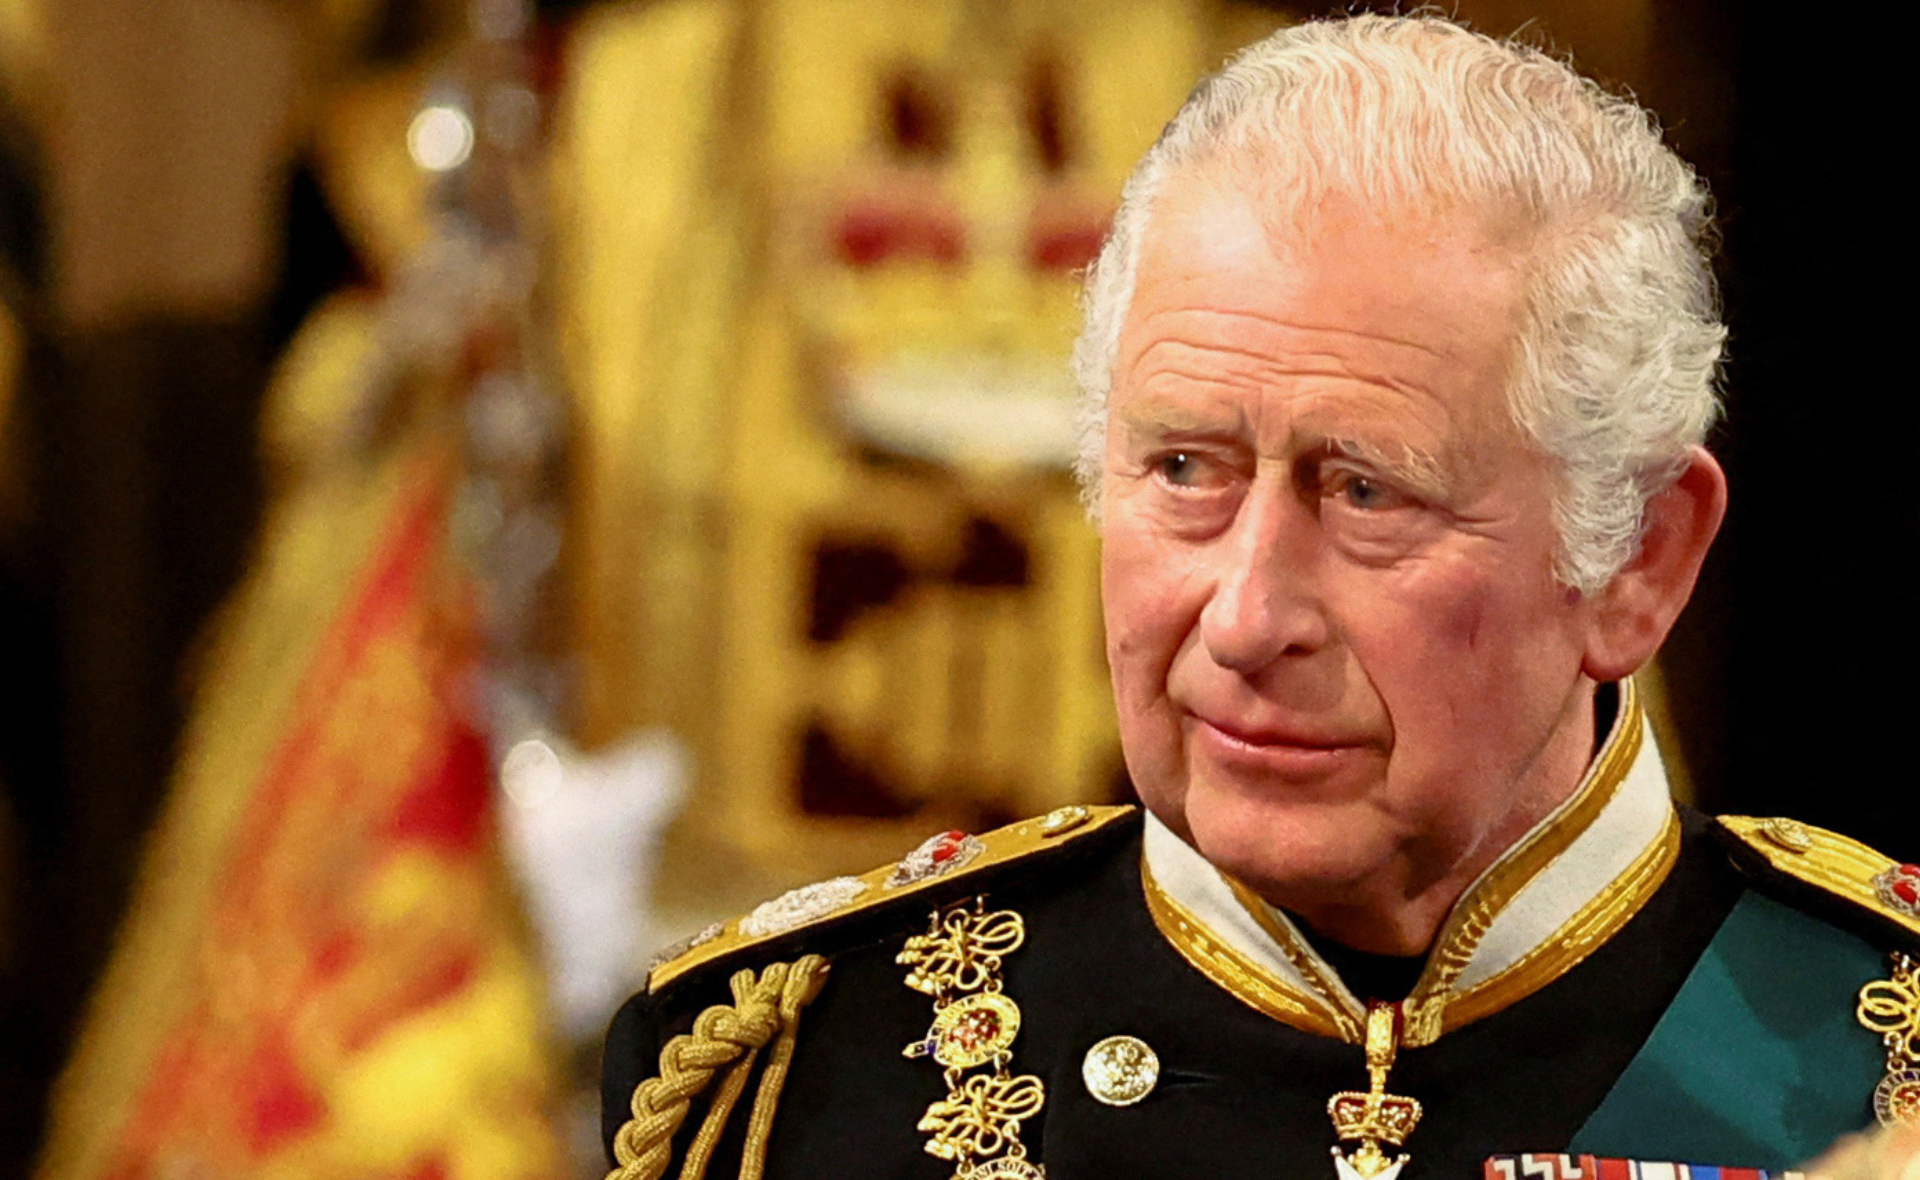 Who is attending King Charles III’s coronation? Here are all the guests as they arrive!